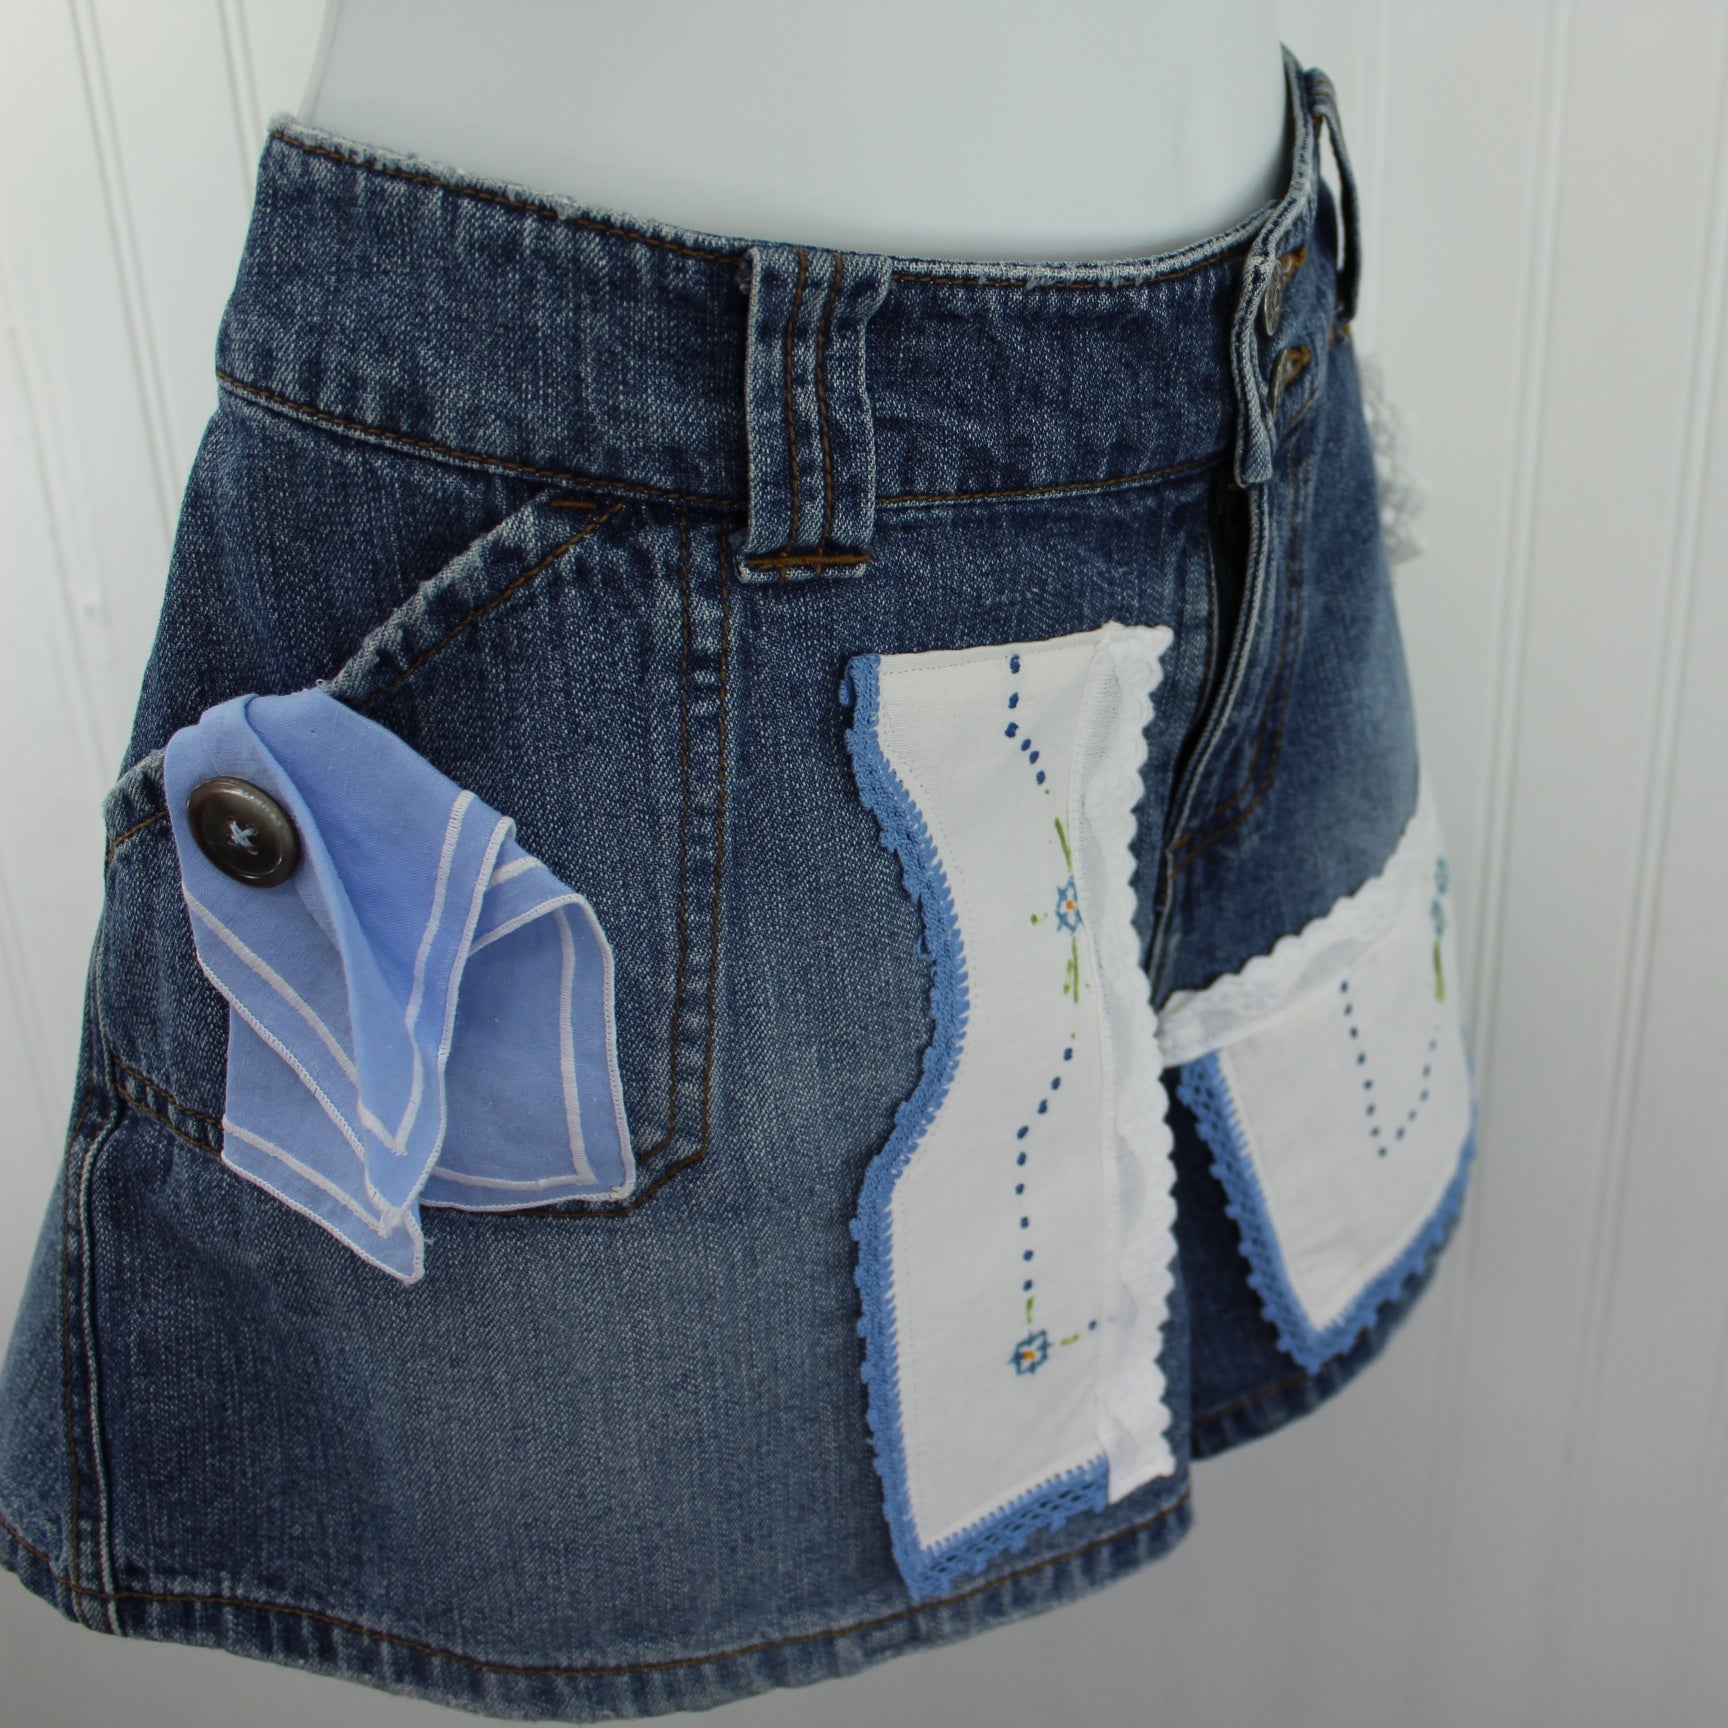 SO Denim Short Jeans 100% Cotton Patzi Design Embroidery Lace Size 15 SO..so real so right label